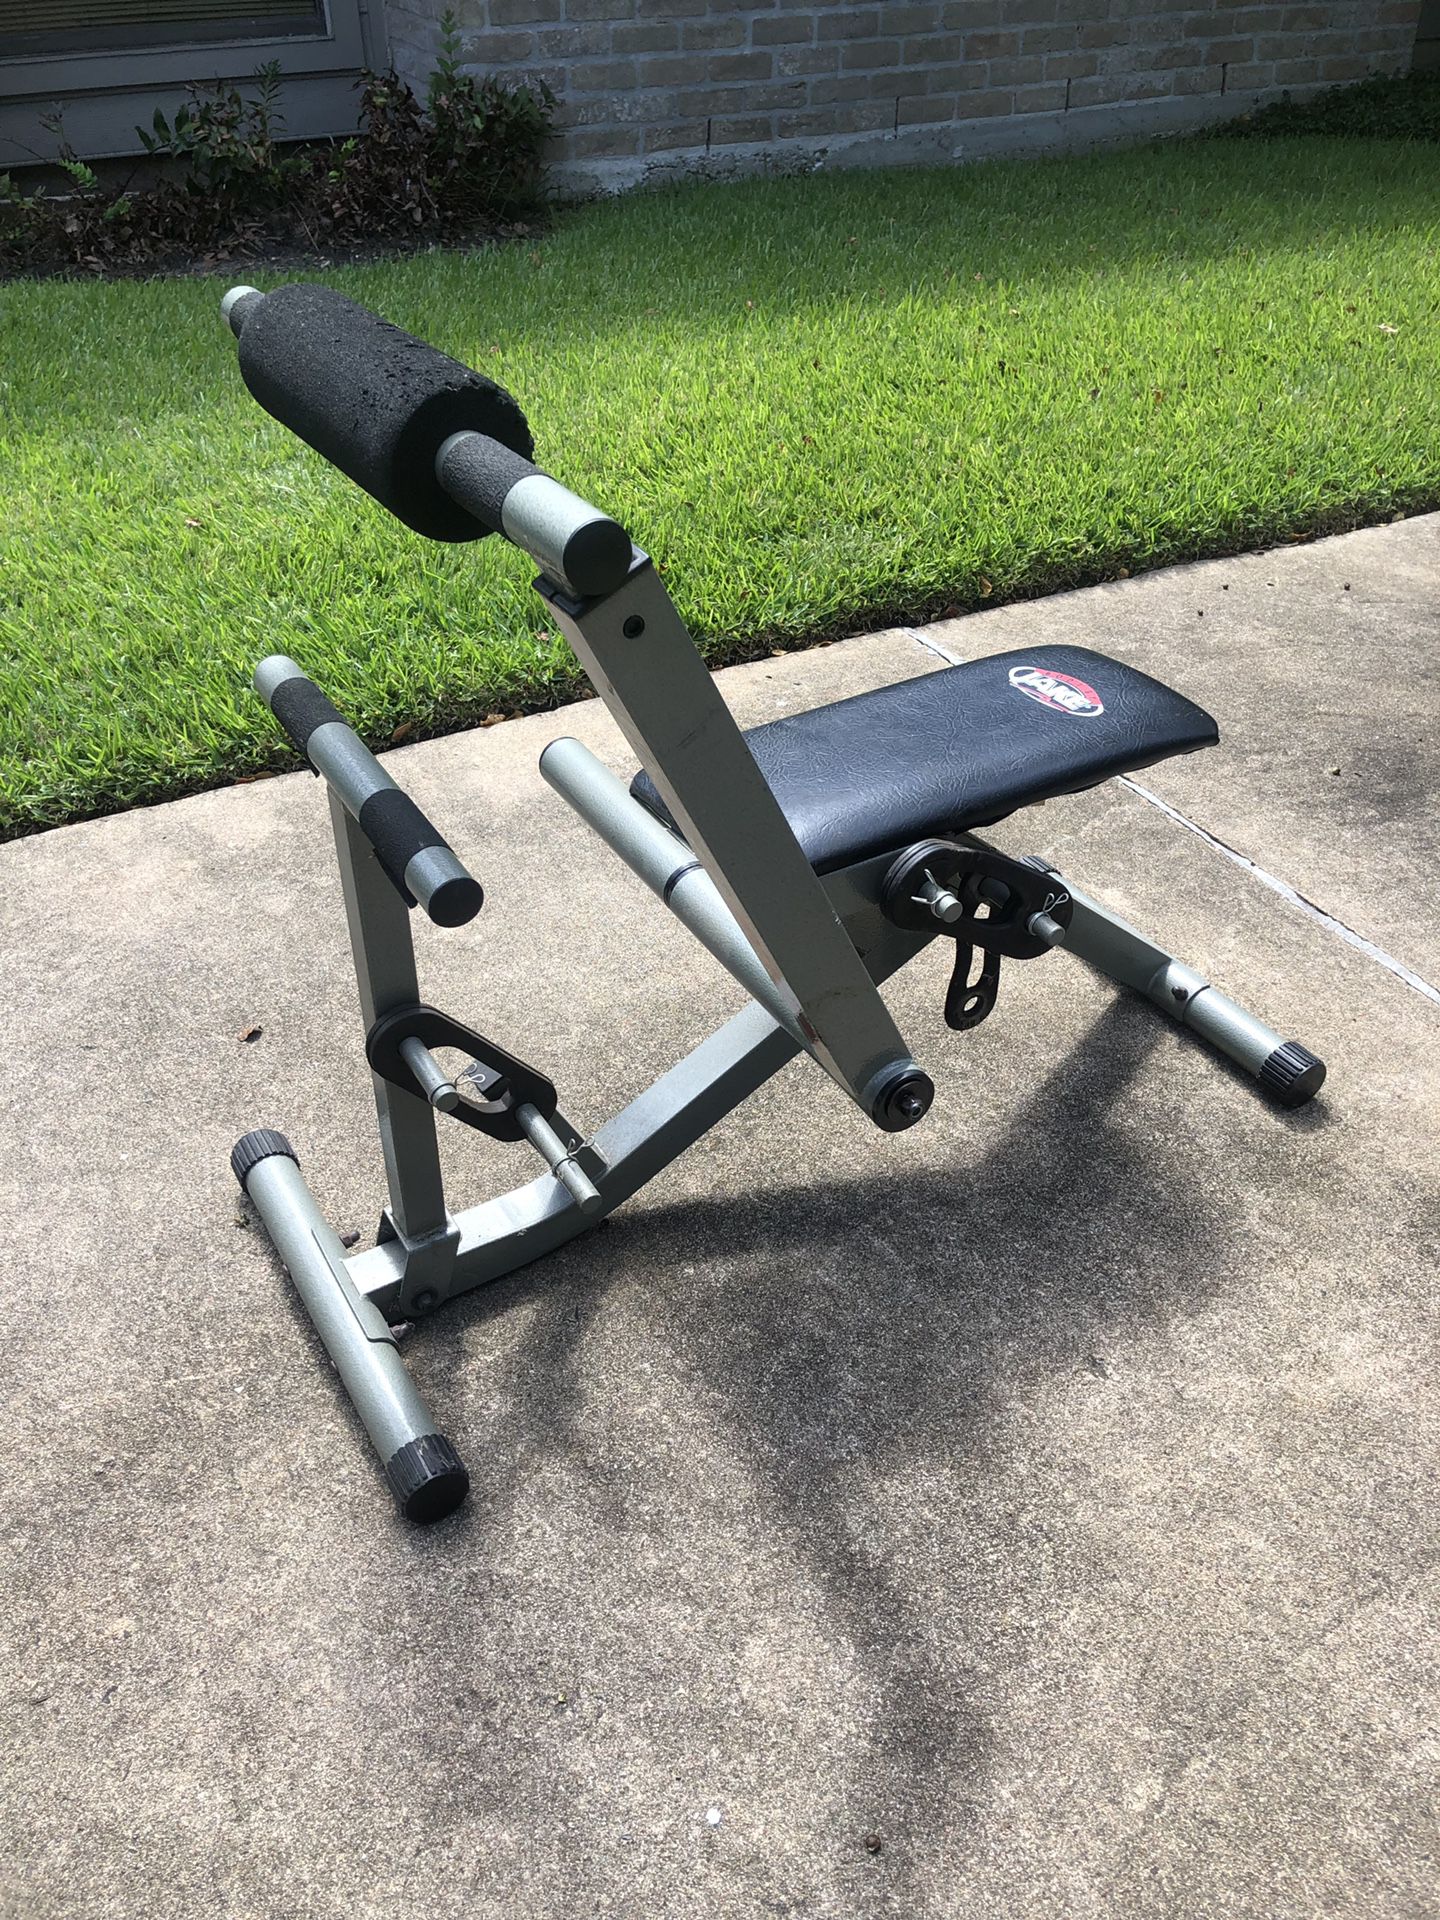 Body by Jake Total Body Trainer Home Gym